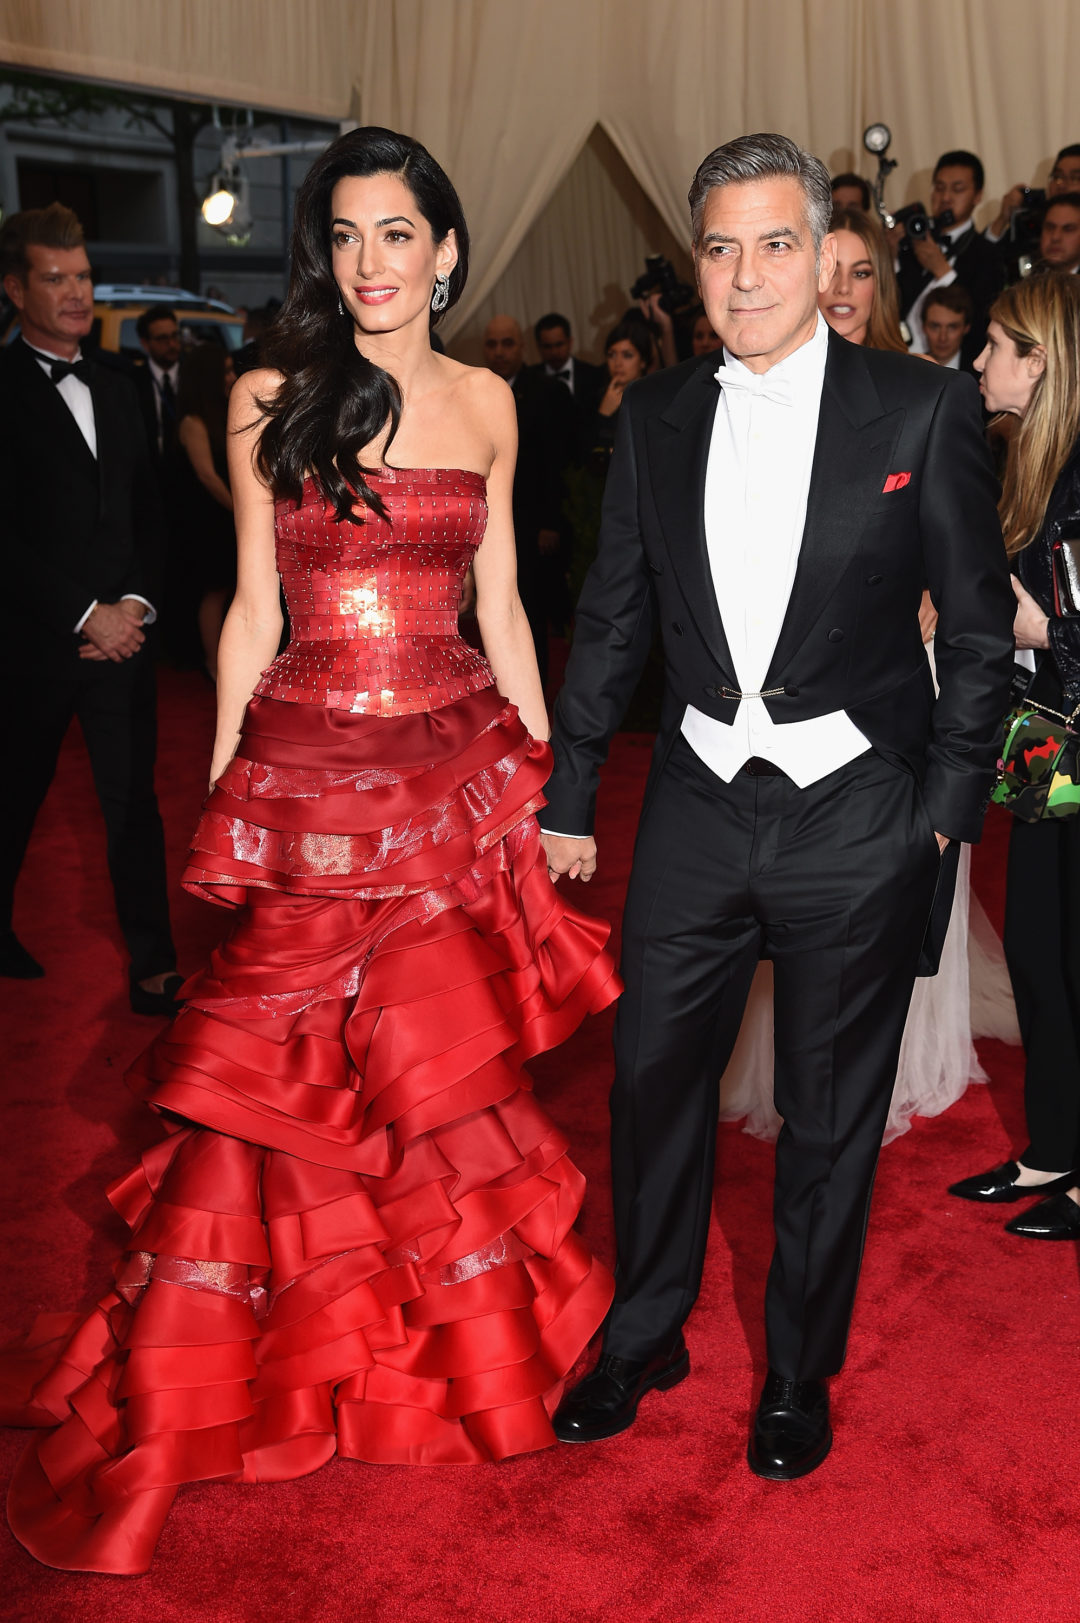 NEW YORK, NY - MAY 04: Amal Clooney and George Clooney attend the "China: Through The Looking Glass" Costume Institute Benefit Gala at the Metropolitan Museum of Art on May 4, 2015 in New York City. (Photo by Dimitrios Kambouris/Getty Images)